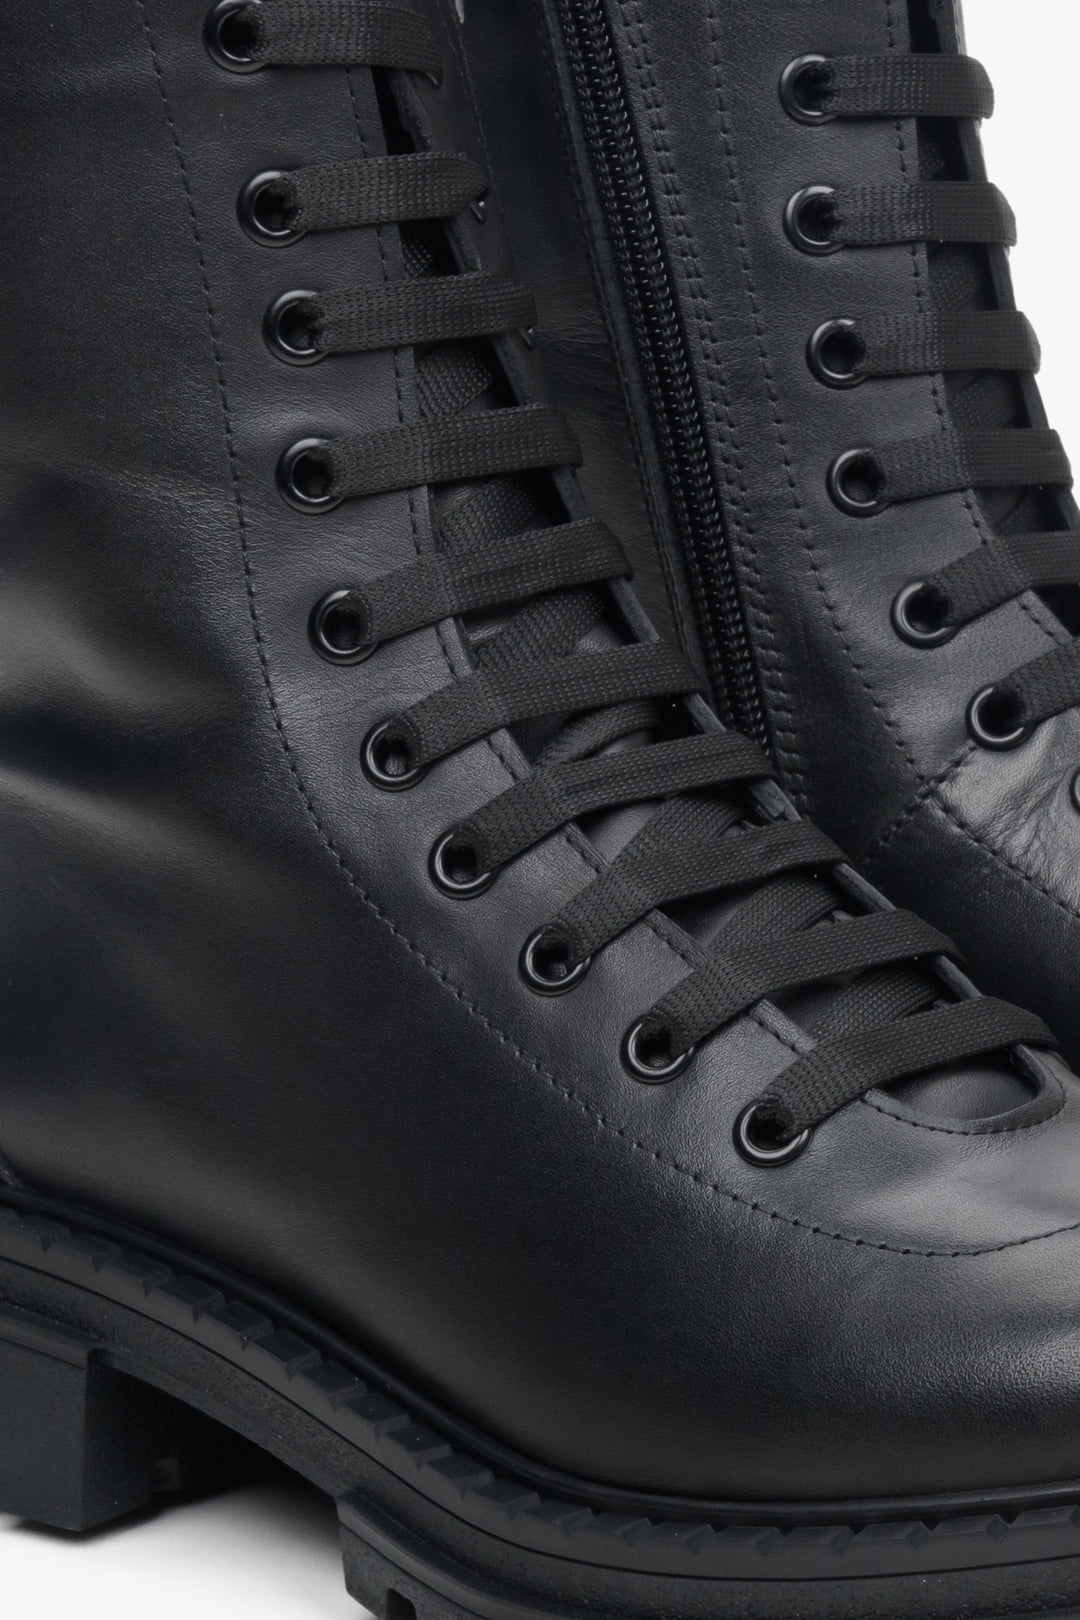 Women's black leather ankle boots with decorative lacing by Estro - close-up on details.